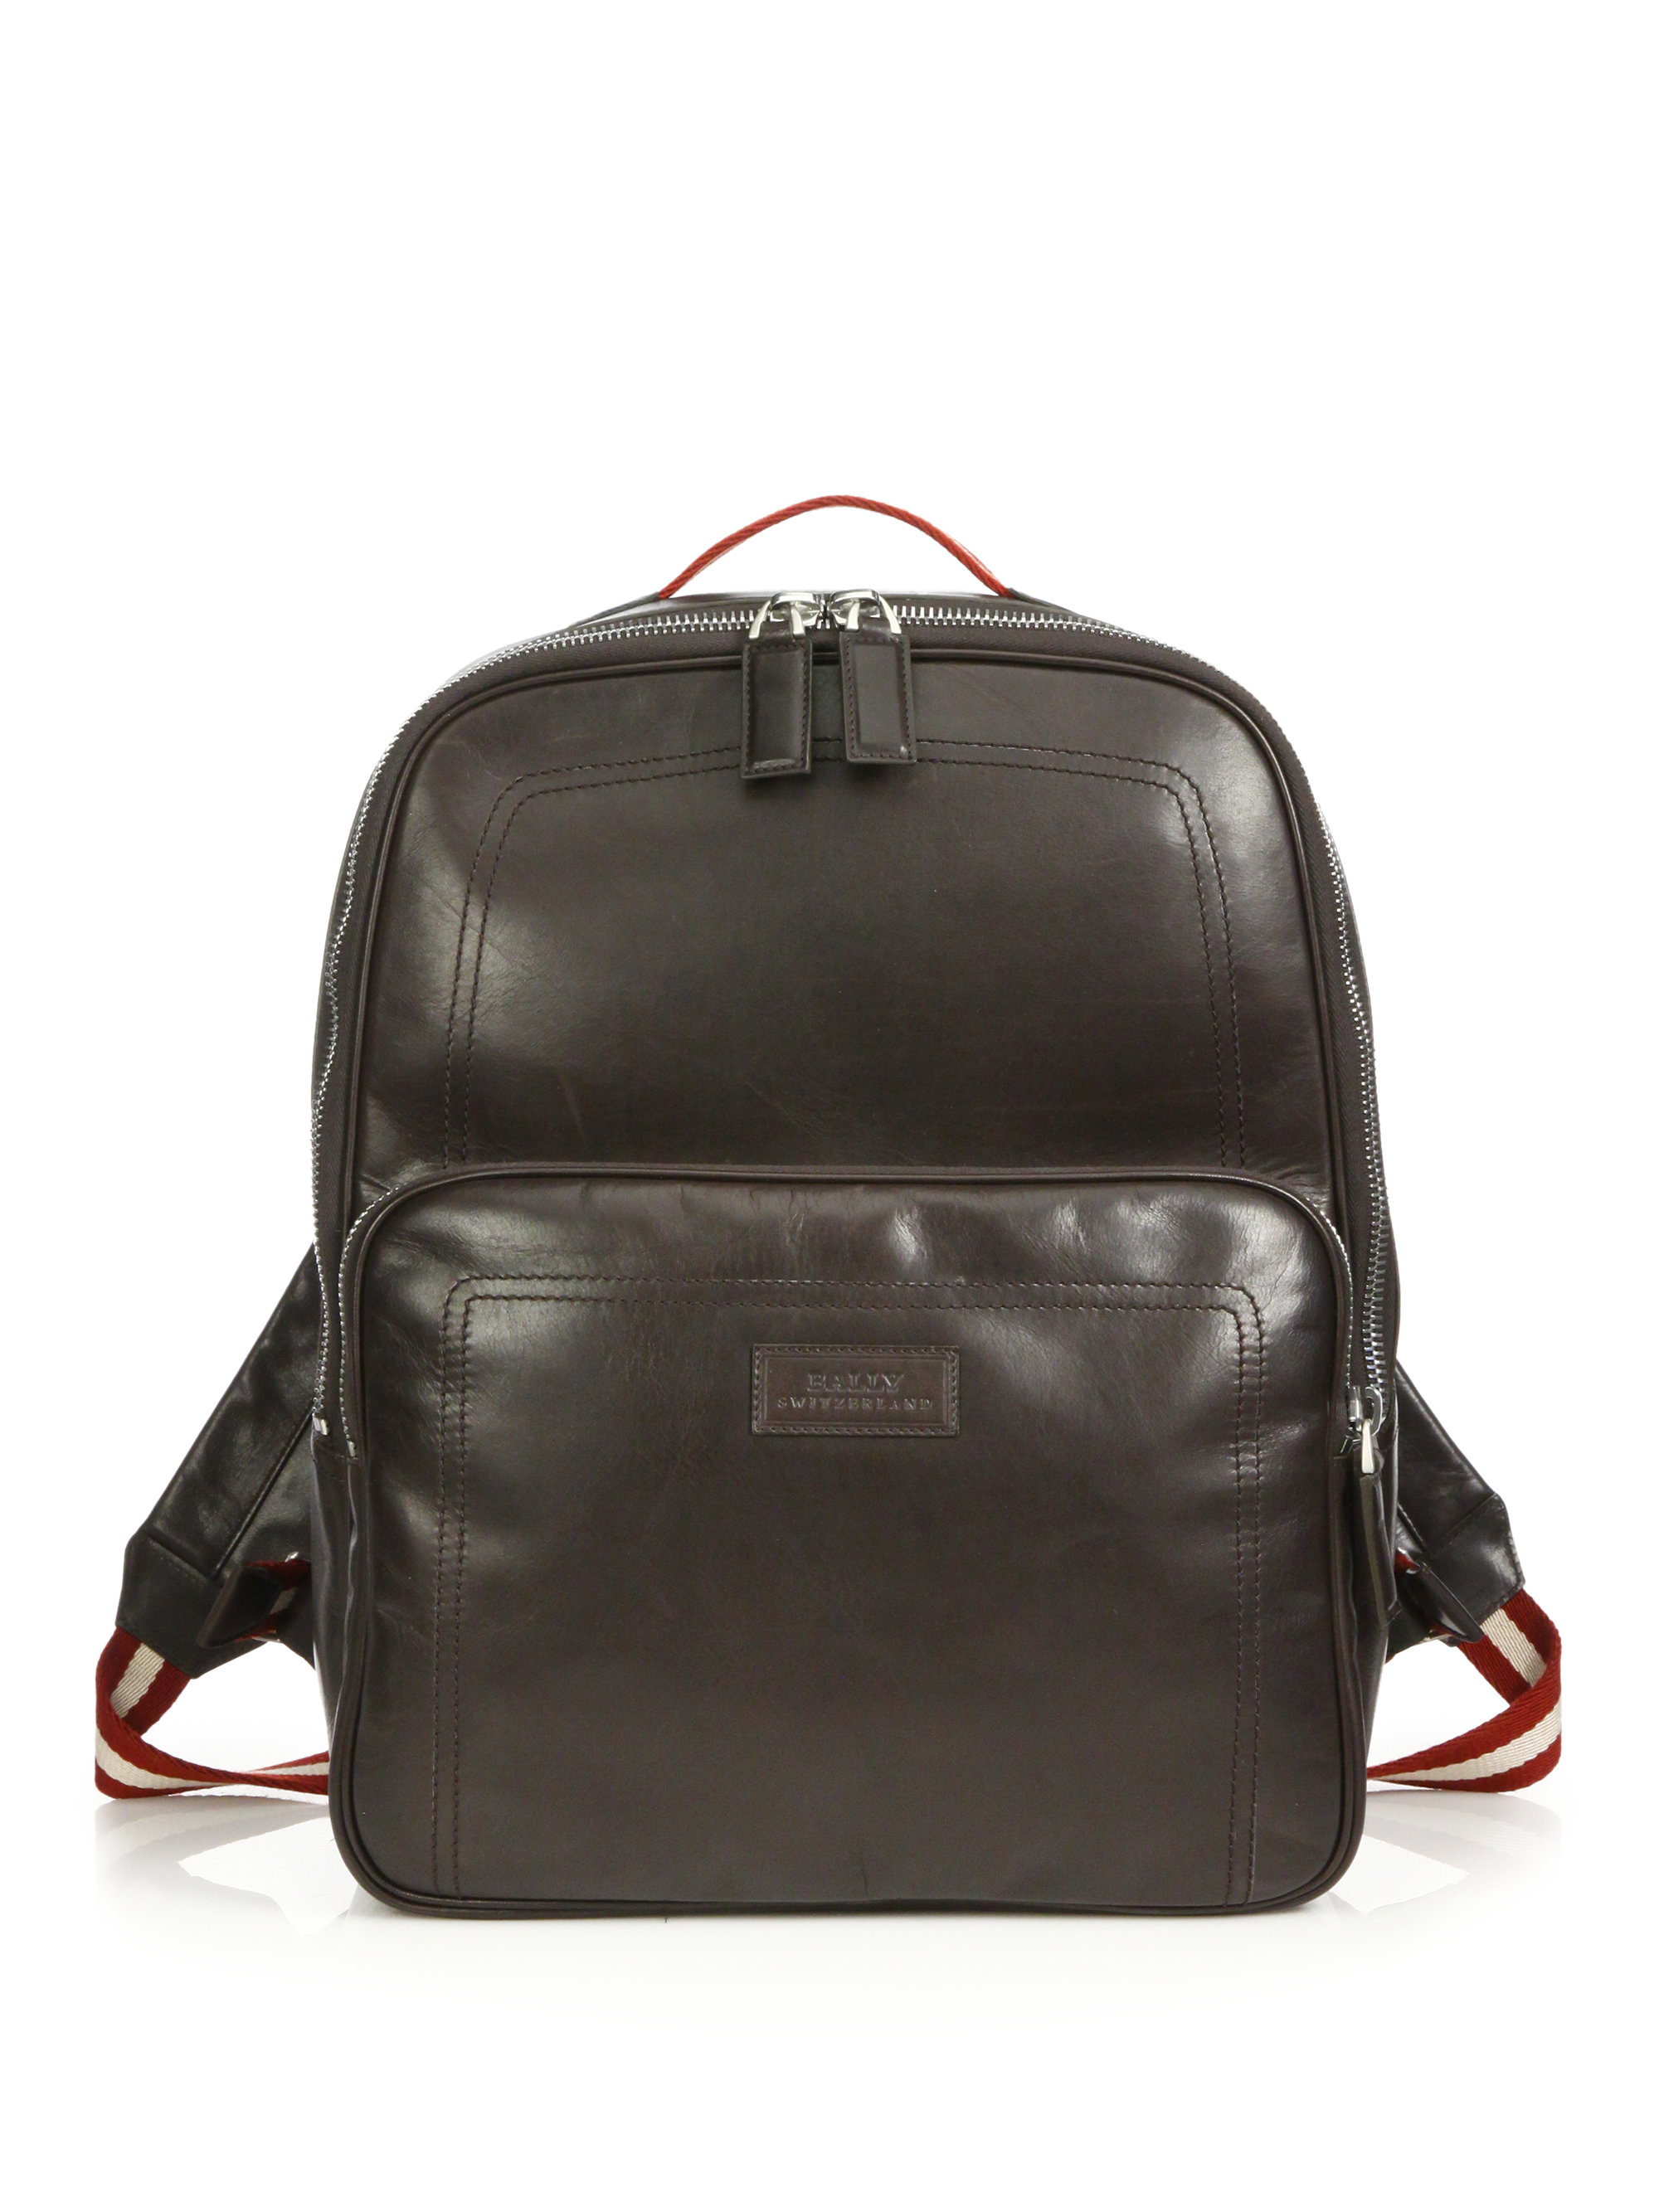 Bally Leather Backpack in Chocolate (Brown) for Men - Lyst